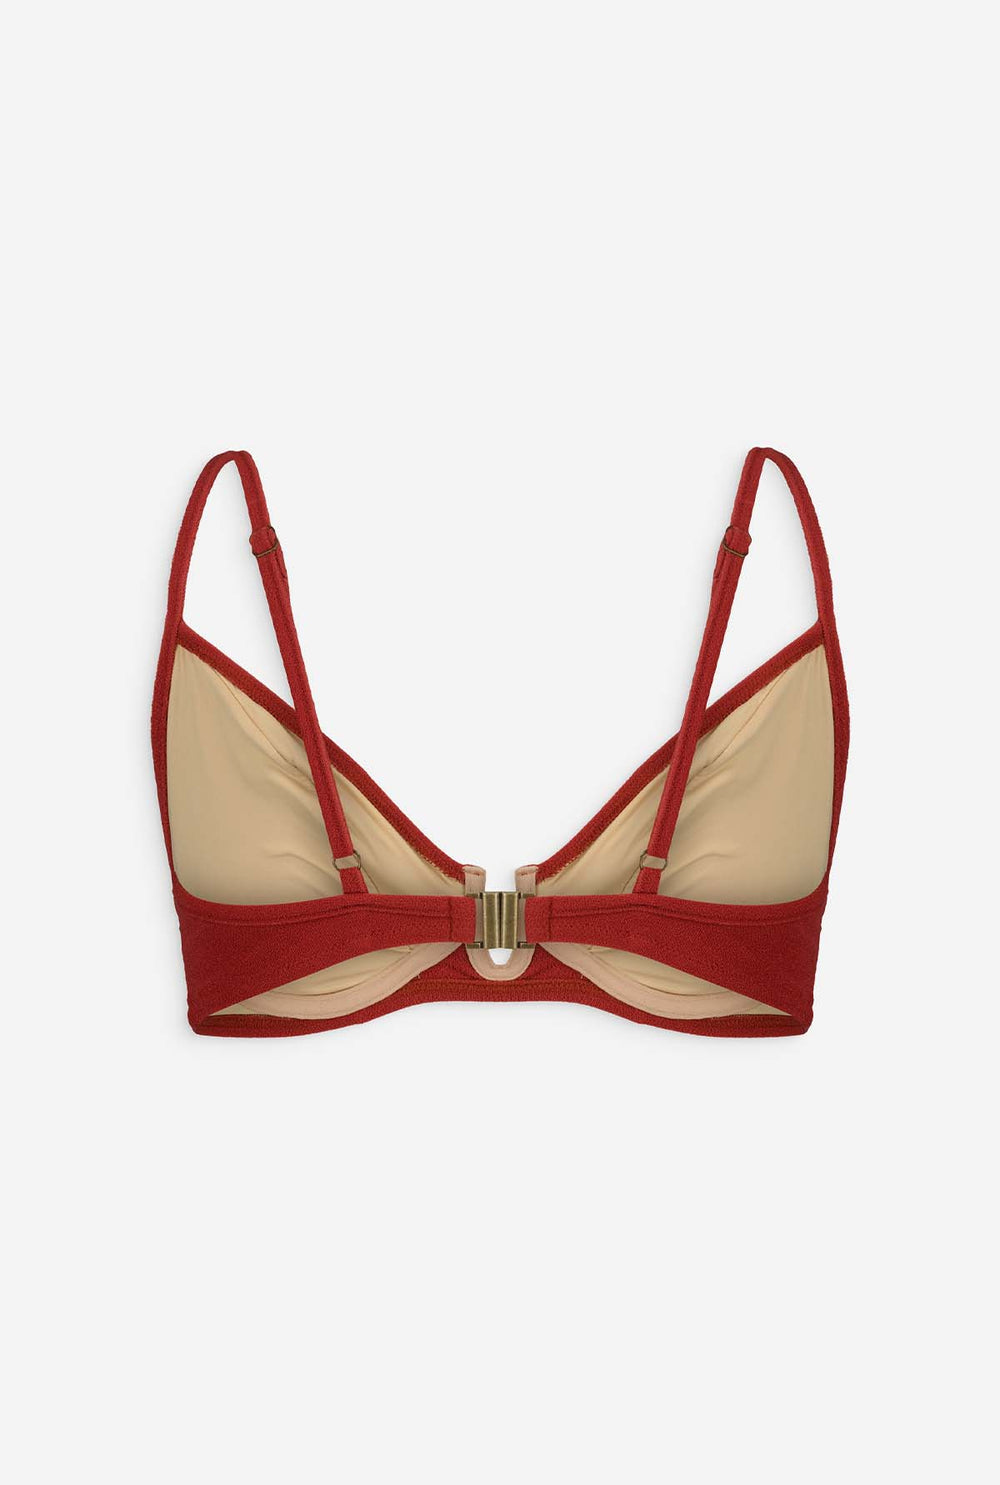 Rosie Top - Pomegranate Red